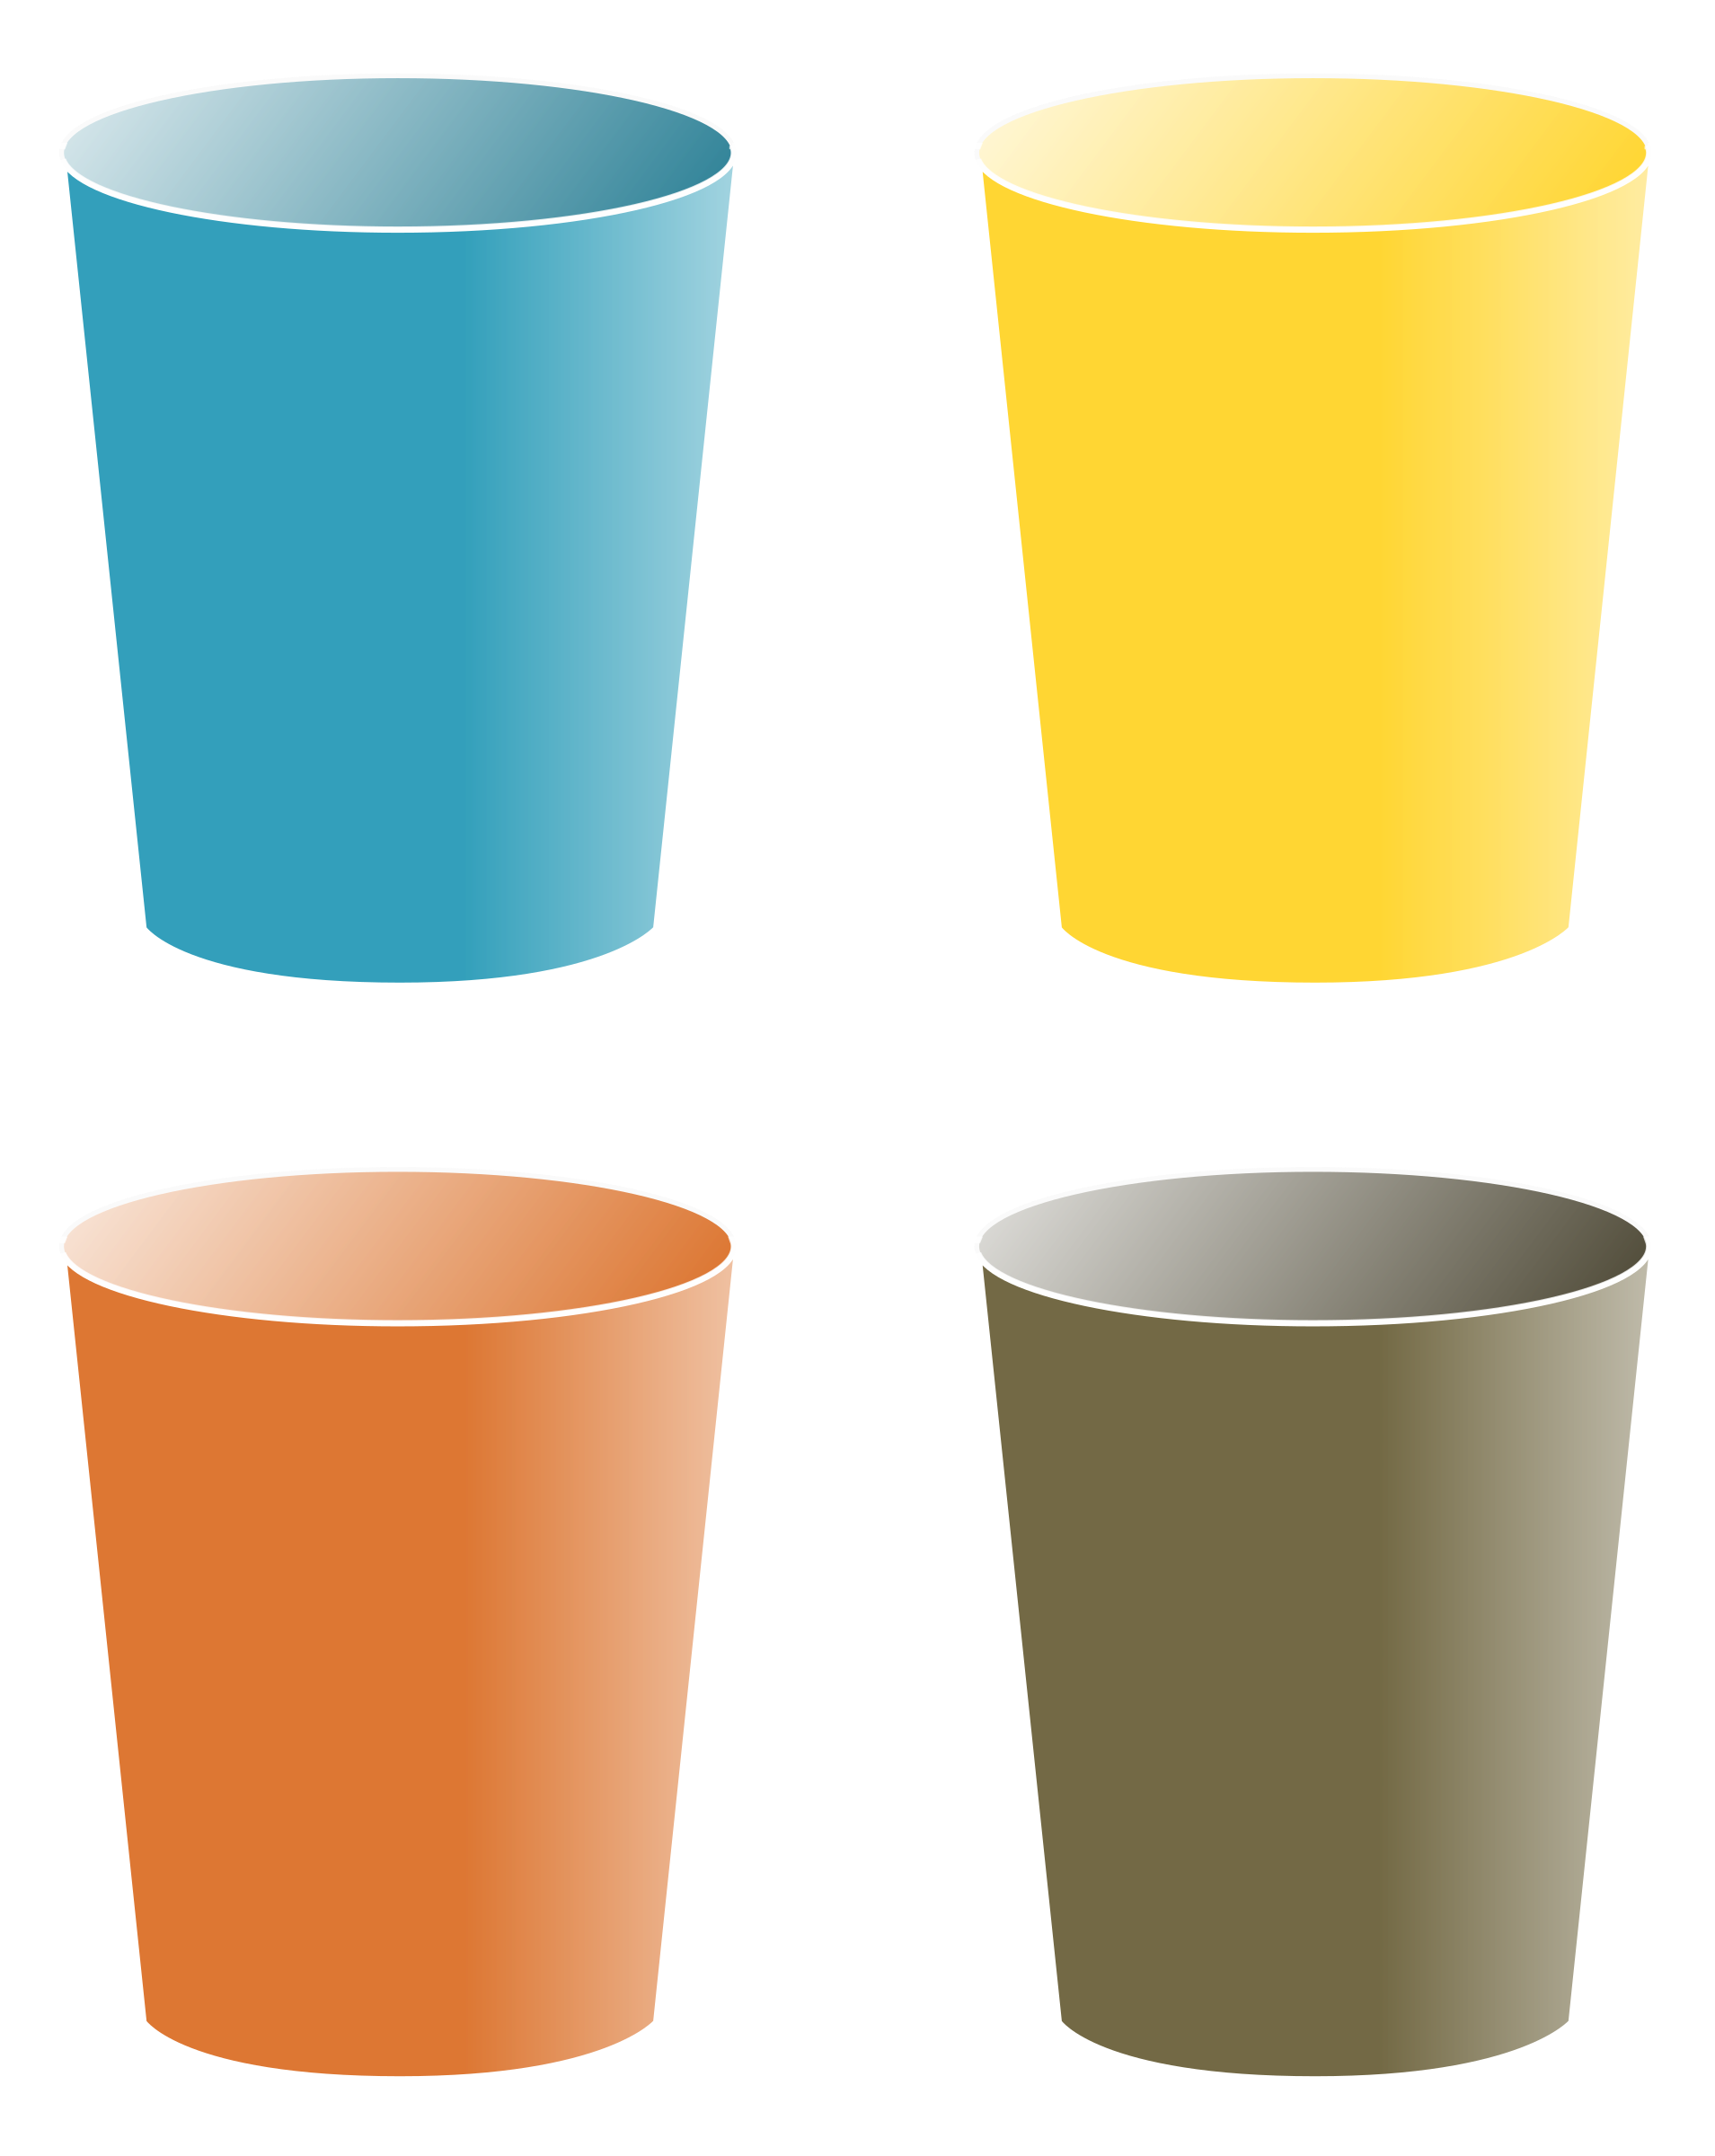 Cups clipart - Clipground